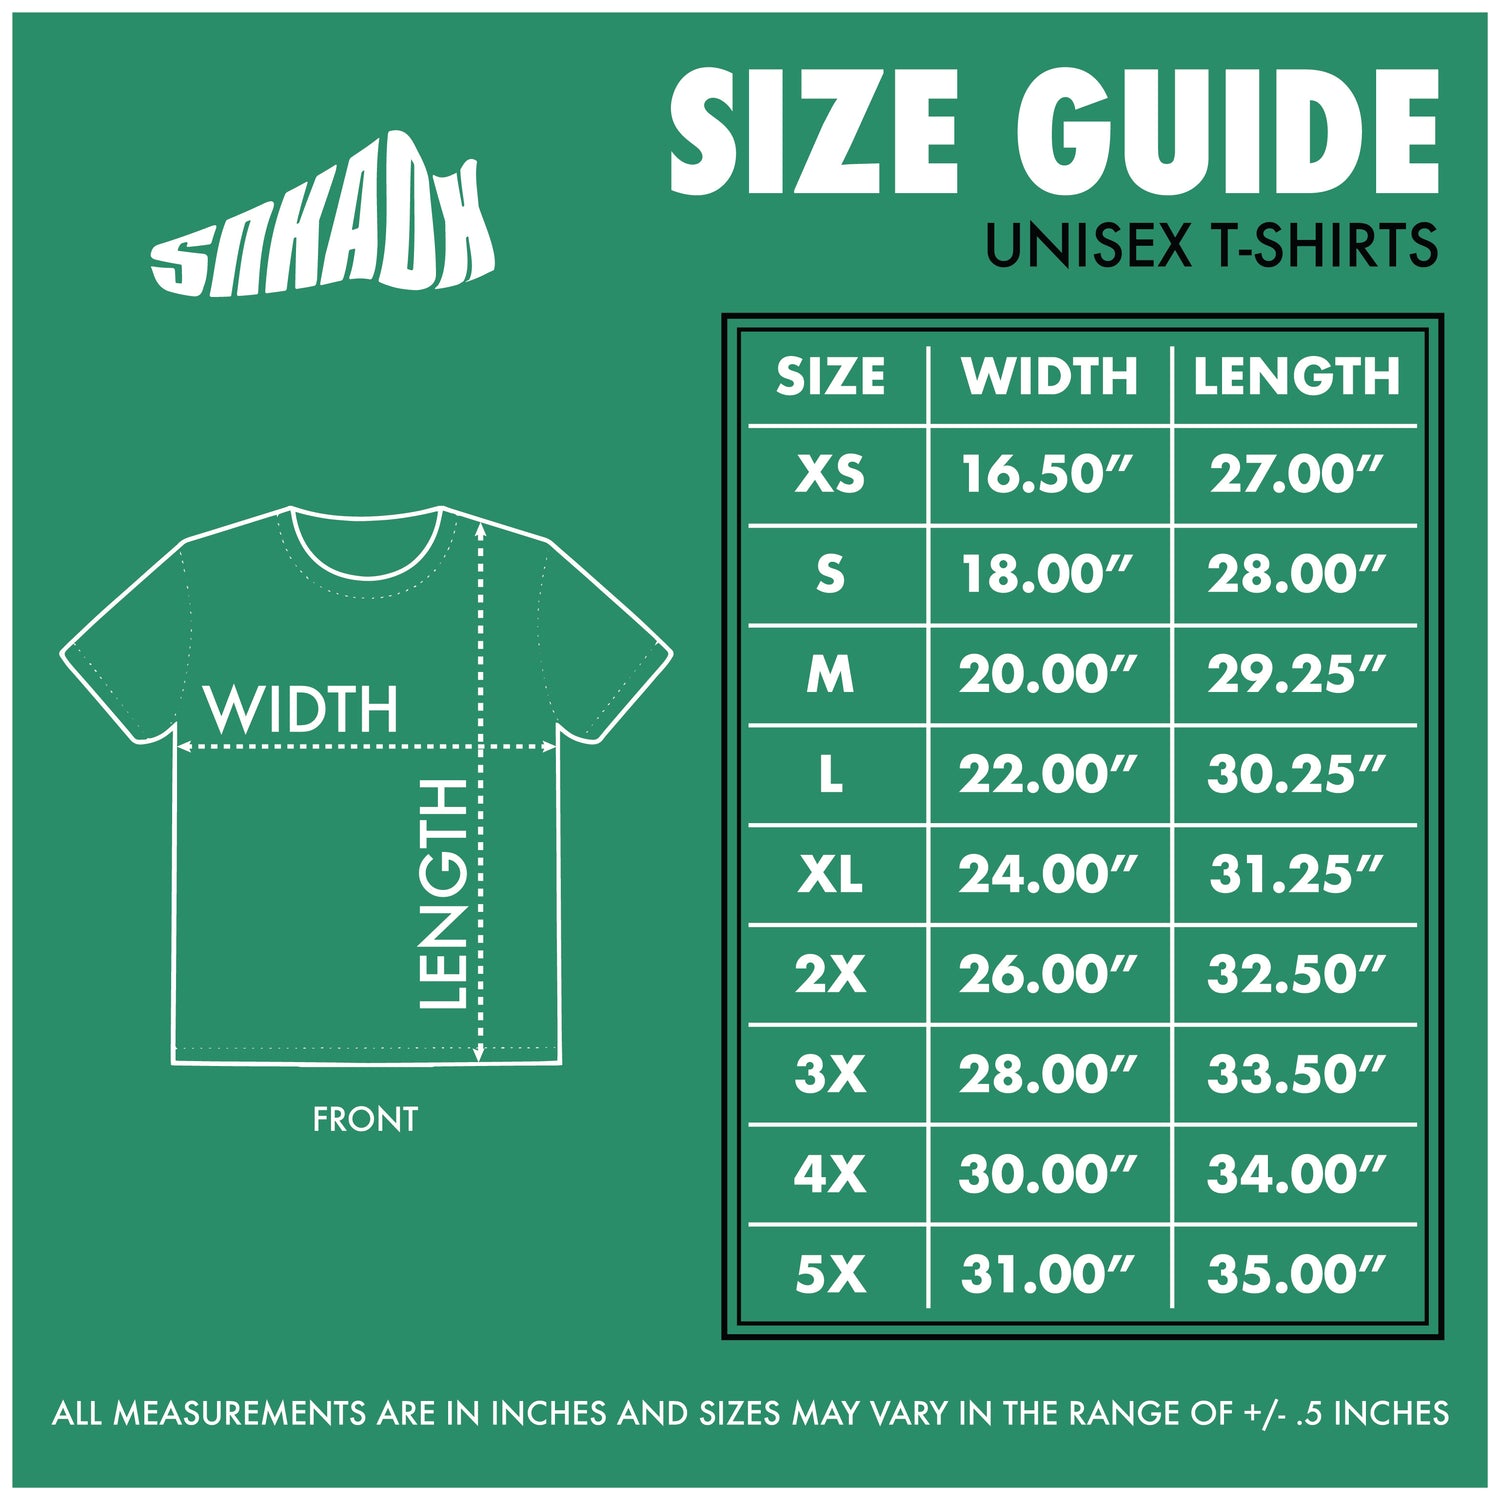 An adult t-shirt made of soft cotton fabric, available in various colors and sizes. The shirt features short sleeves, a crewneck collar, and a relaxed fit for comfortable wear. The design may include graphics, patterns, or text for different styles.